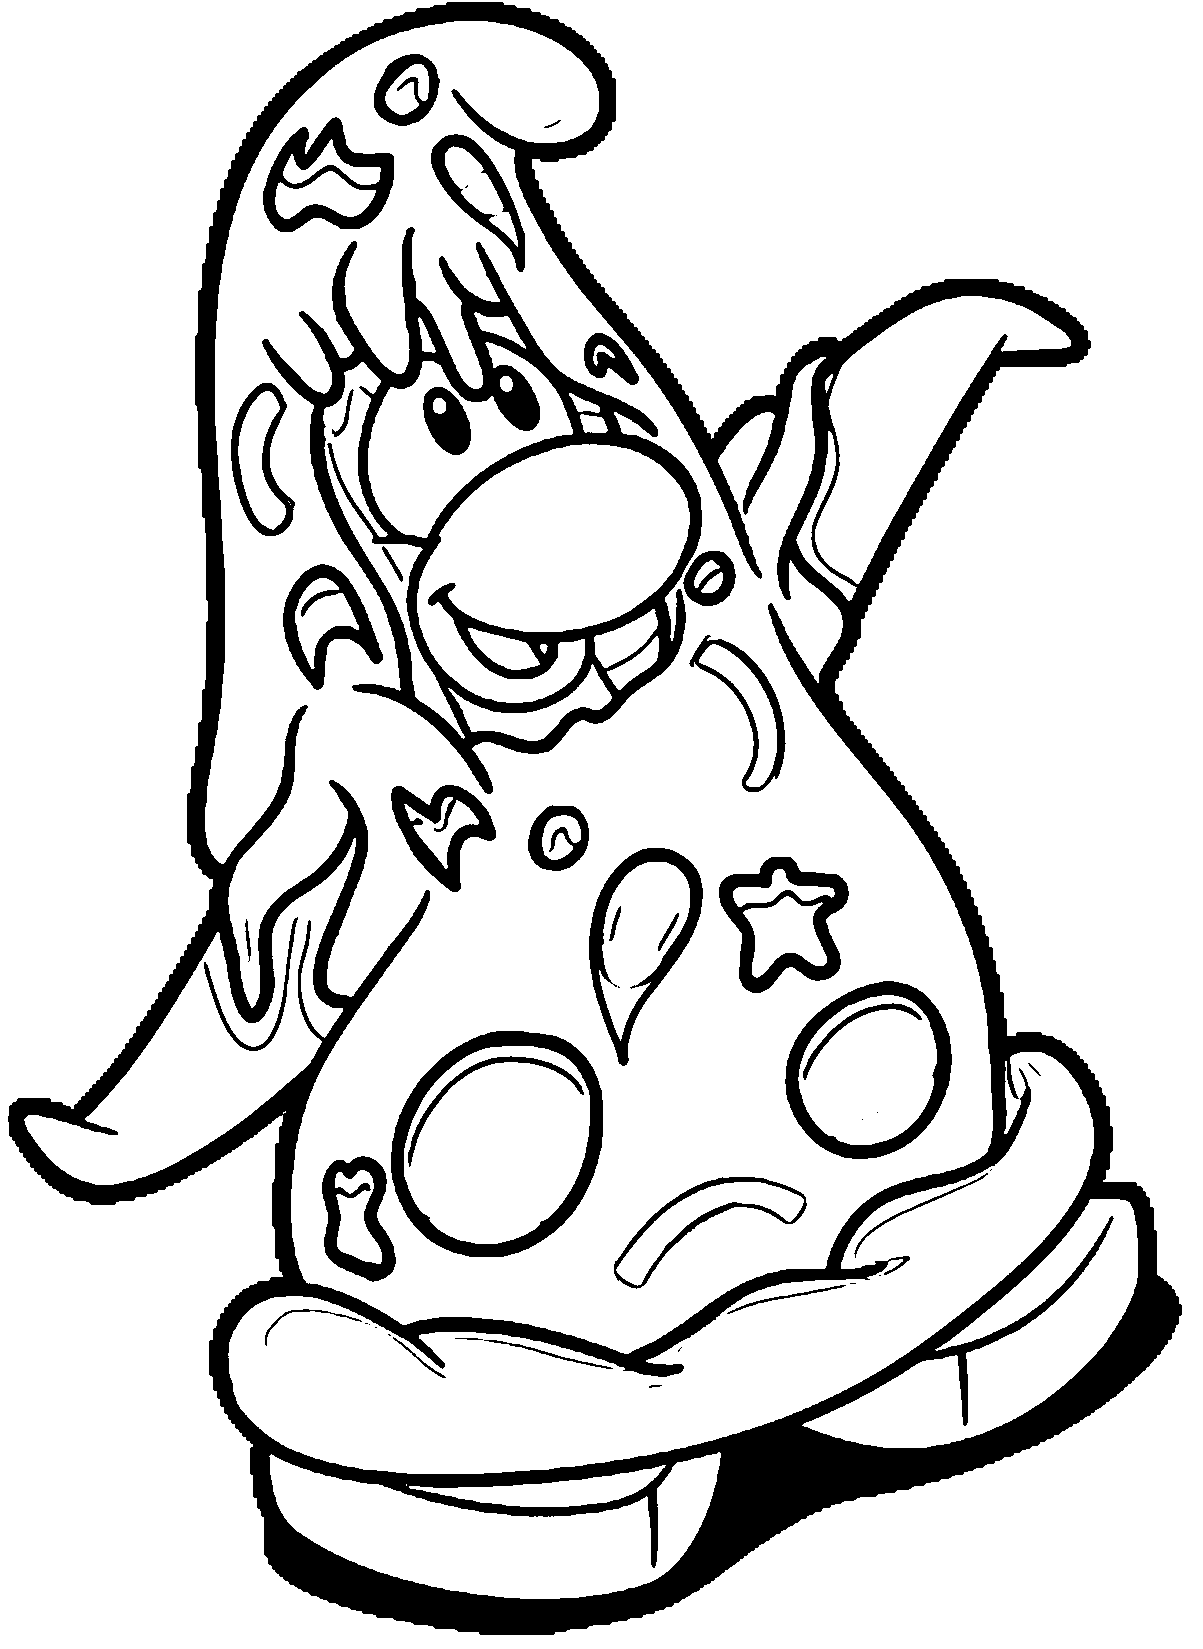 blippi airplane coloring page